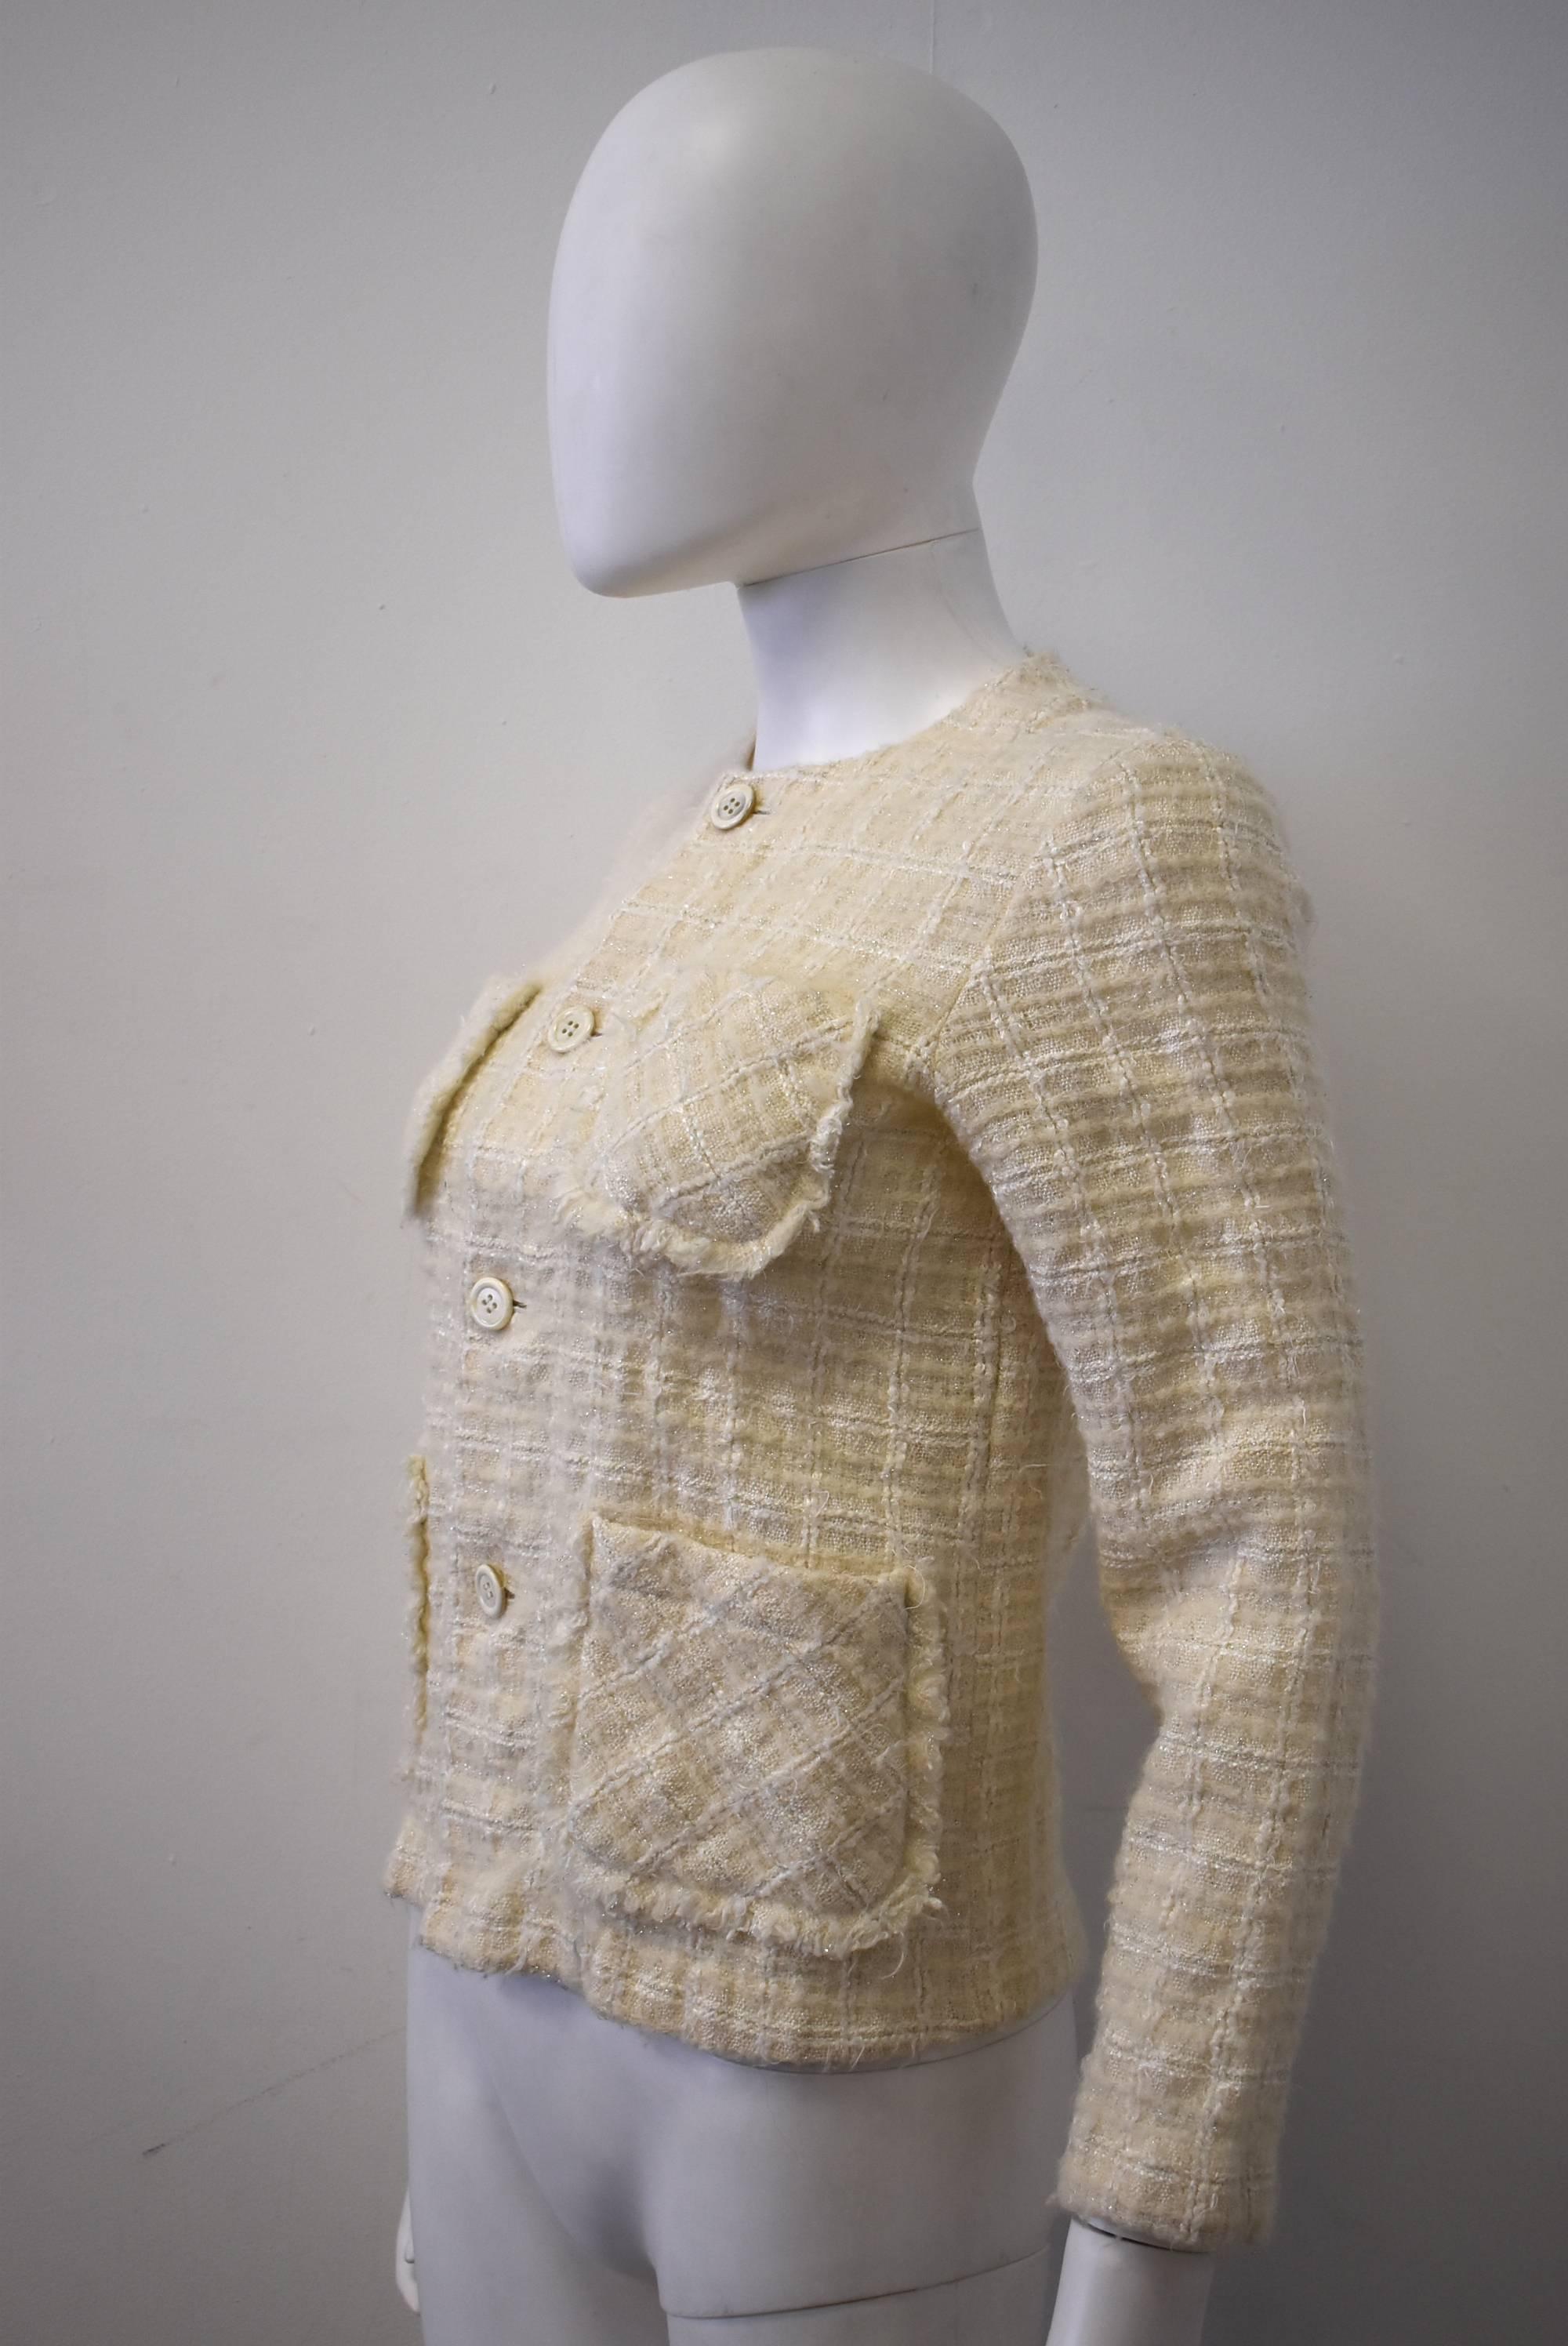 An elegant and classic cream boucle jacket from the Tricot line of Comme des Garcons. The jacket has a cropped, boxy shape that looks toward Chanel's classic jackets as inspiration. There are four patch pockets on the front of the jacket and button